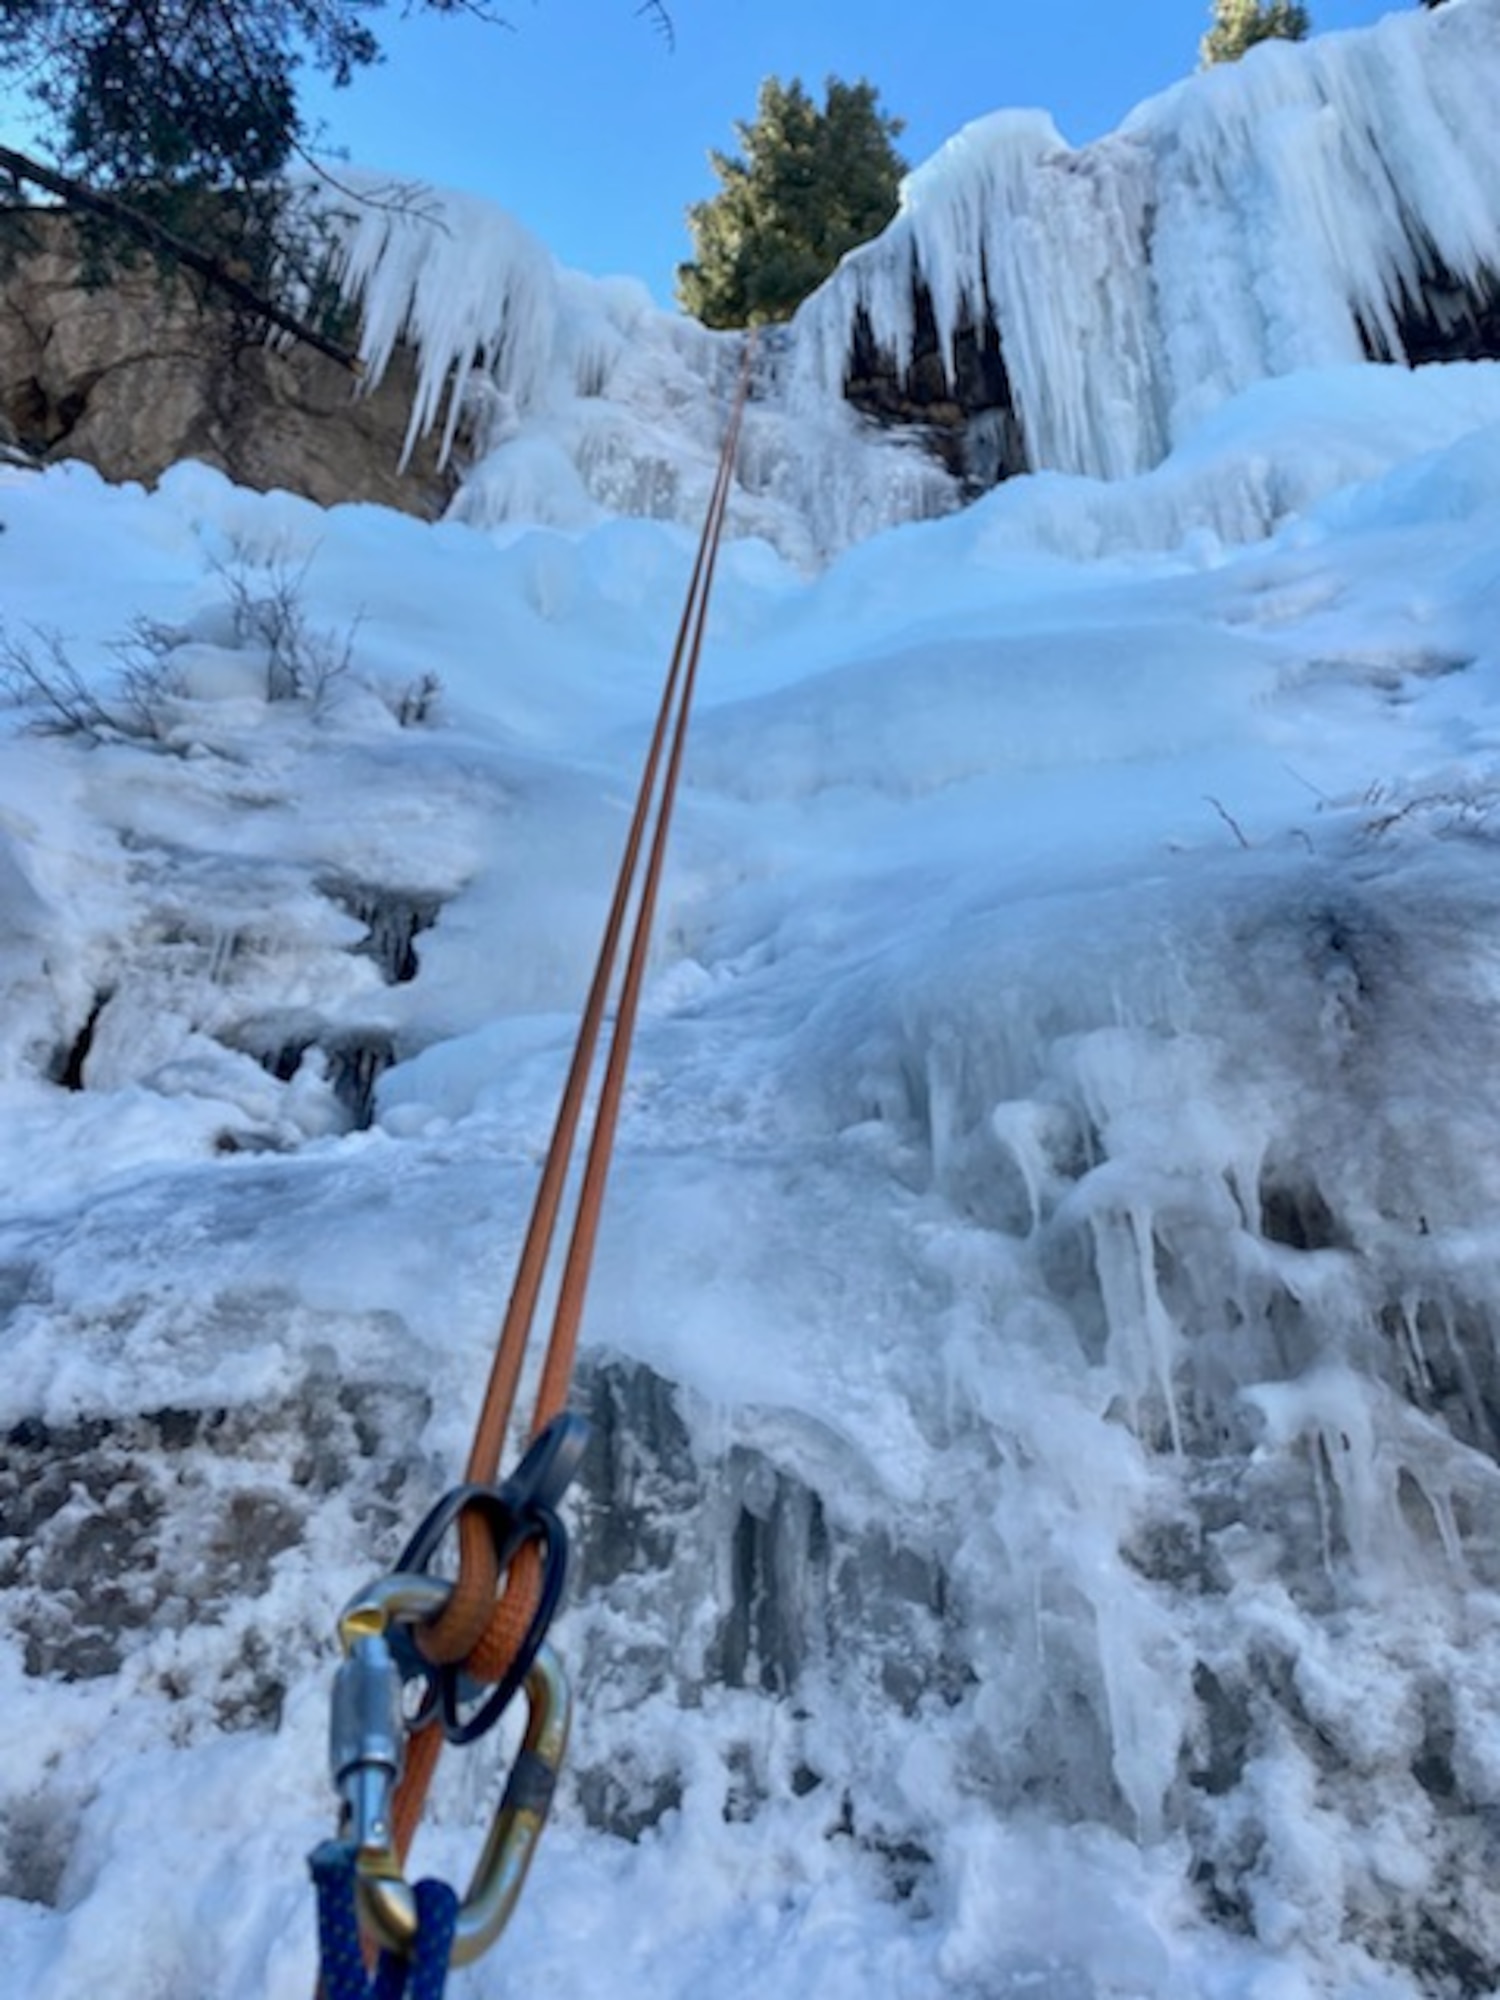 A rope harness is tested by a Special Warfare Pararescue (PJ) eight-man team from Kirtland AFB, who sprang into action to help rescue a civilian climber injured by falling rocks on January 7, 2021, in Ouray, CO.